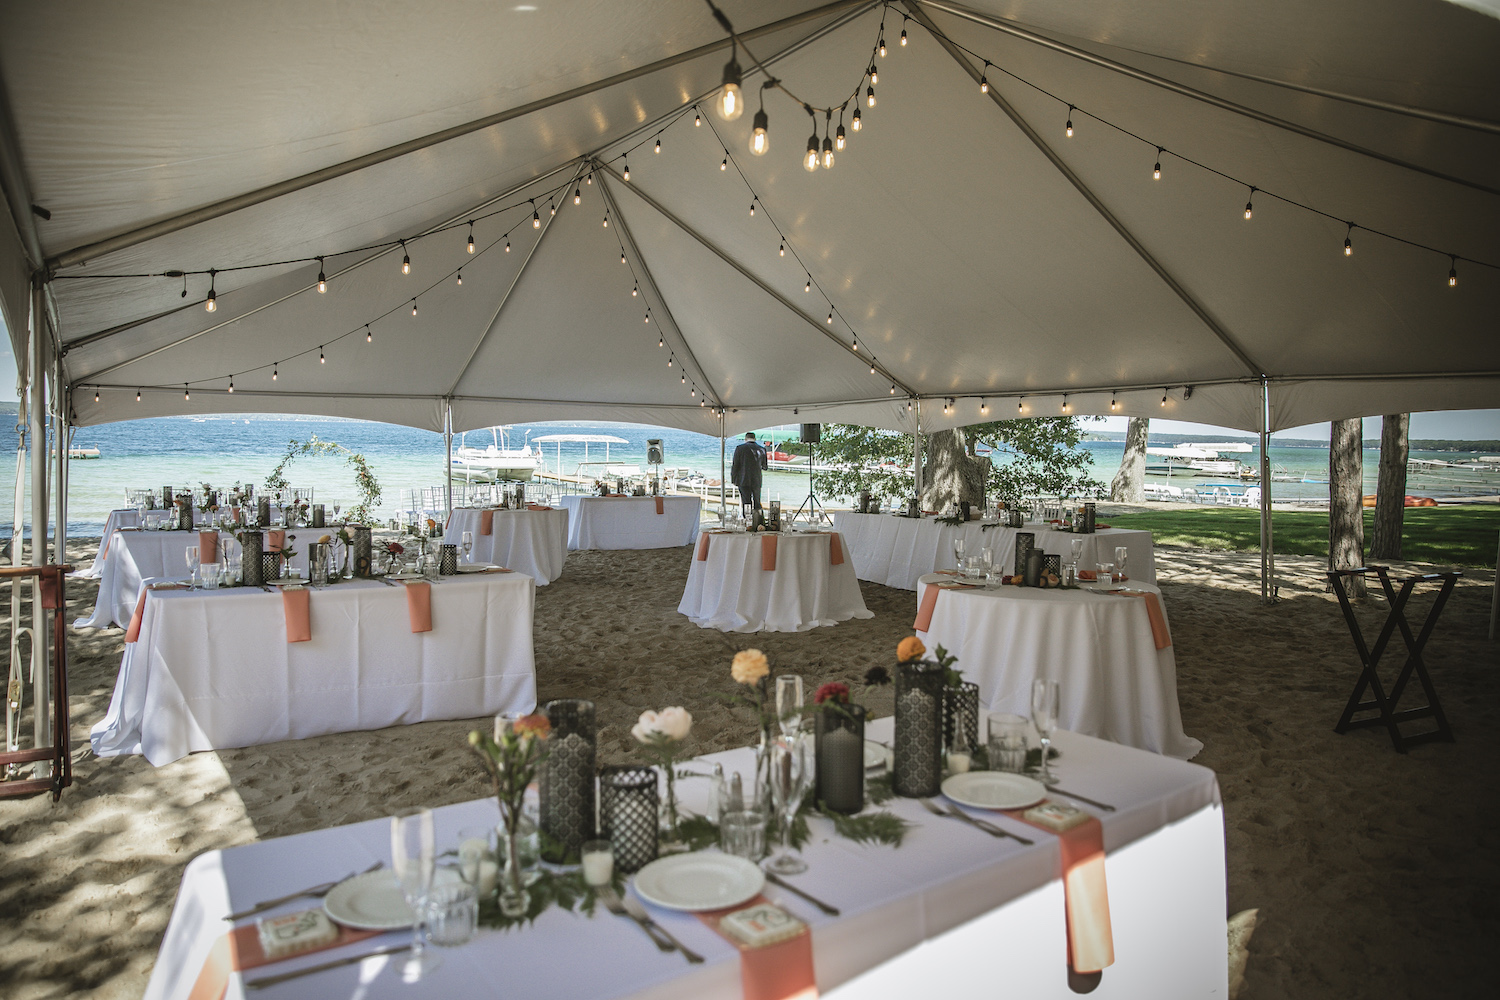 Higgins lake wedding reception tables and tent